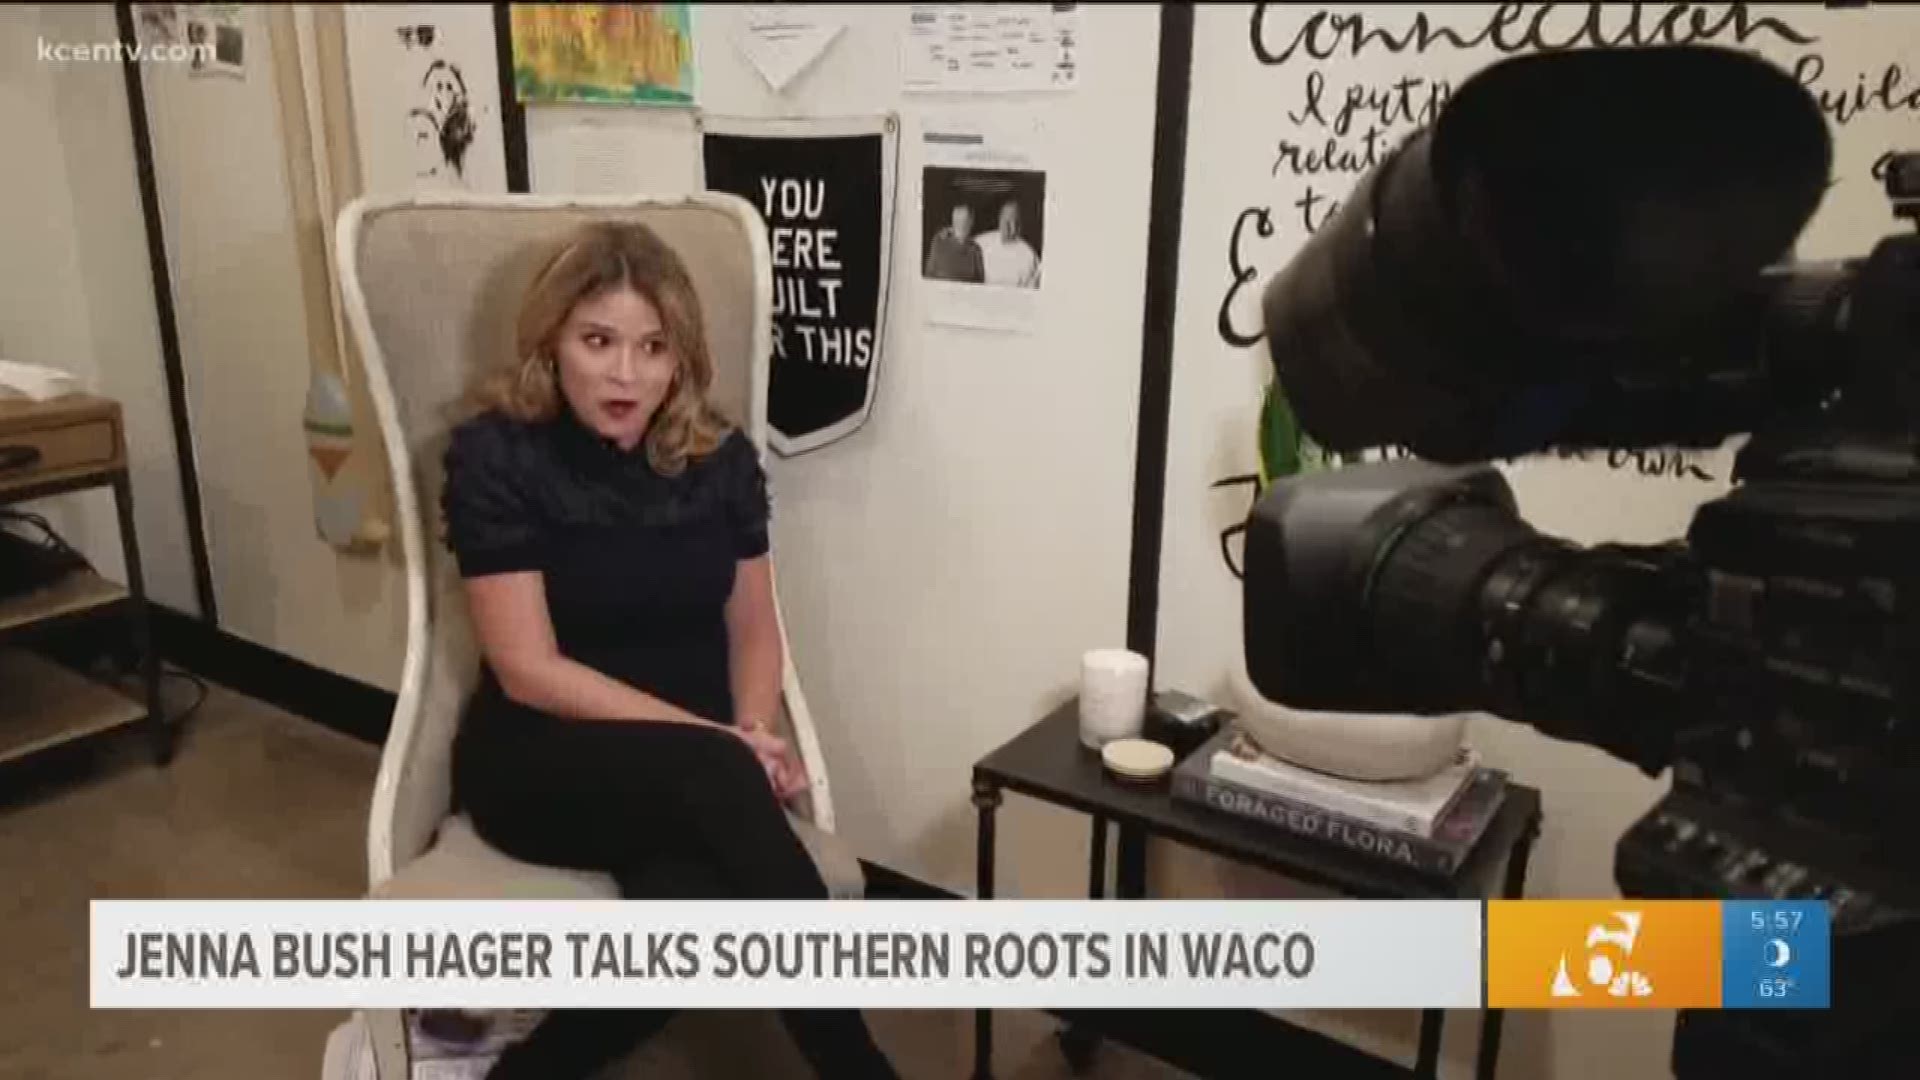 Jenna Bush Hagar was in Waco to moderate a discussion with actress Reese Witherspoon.